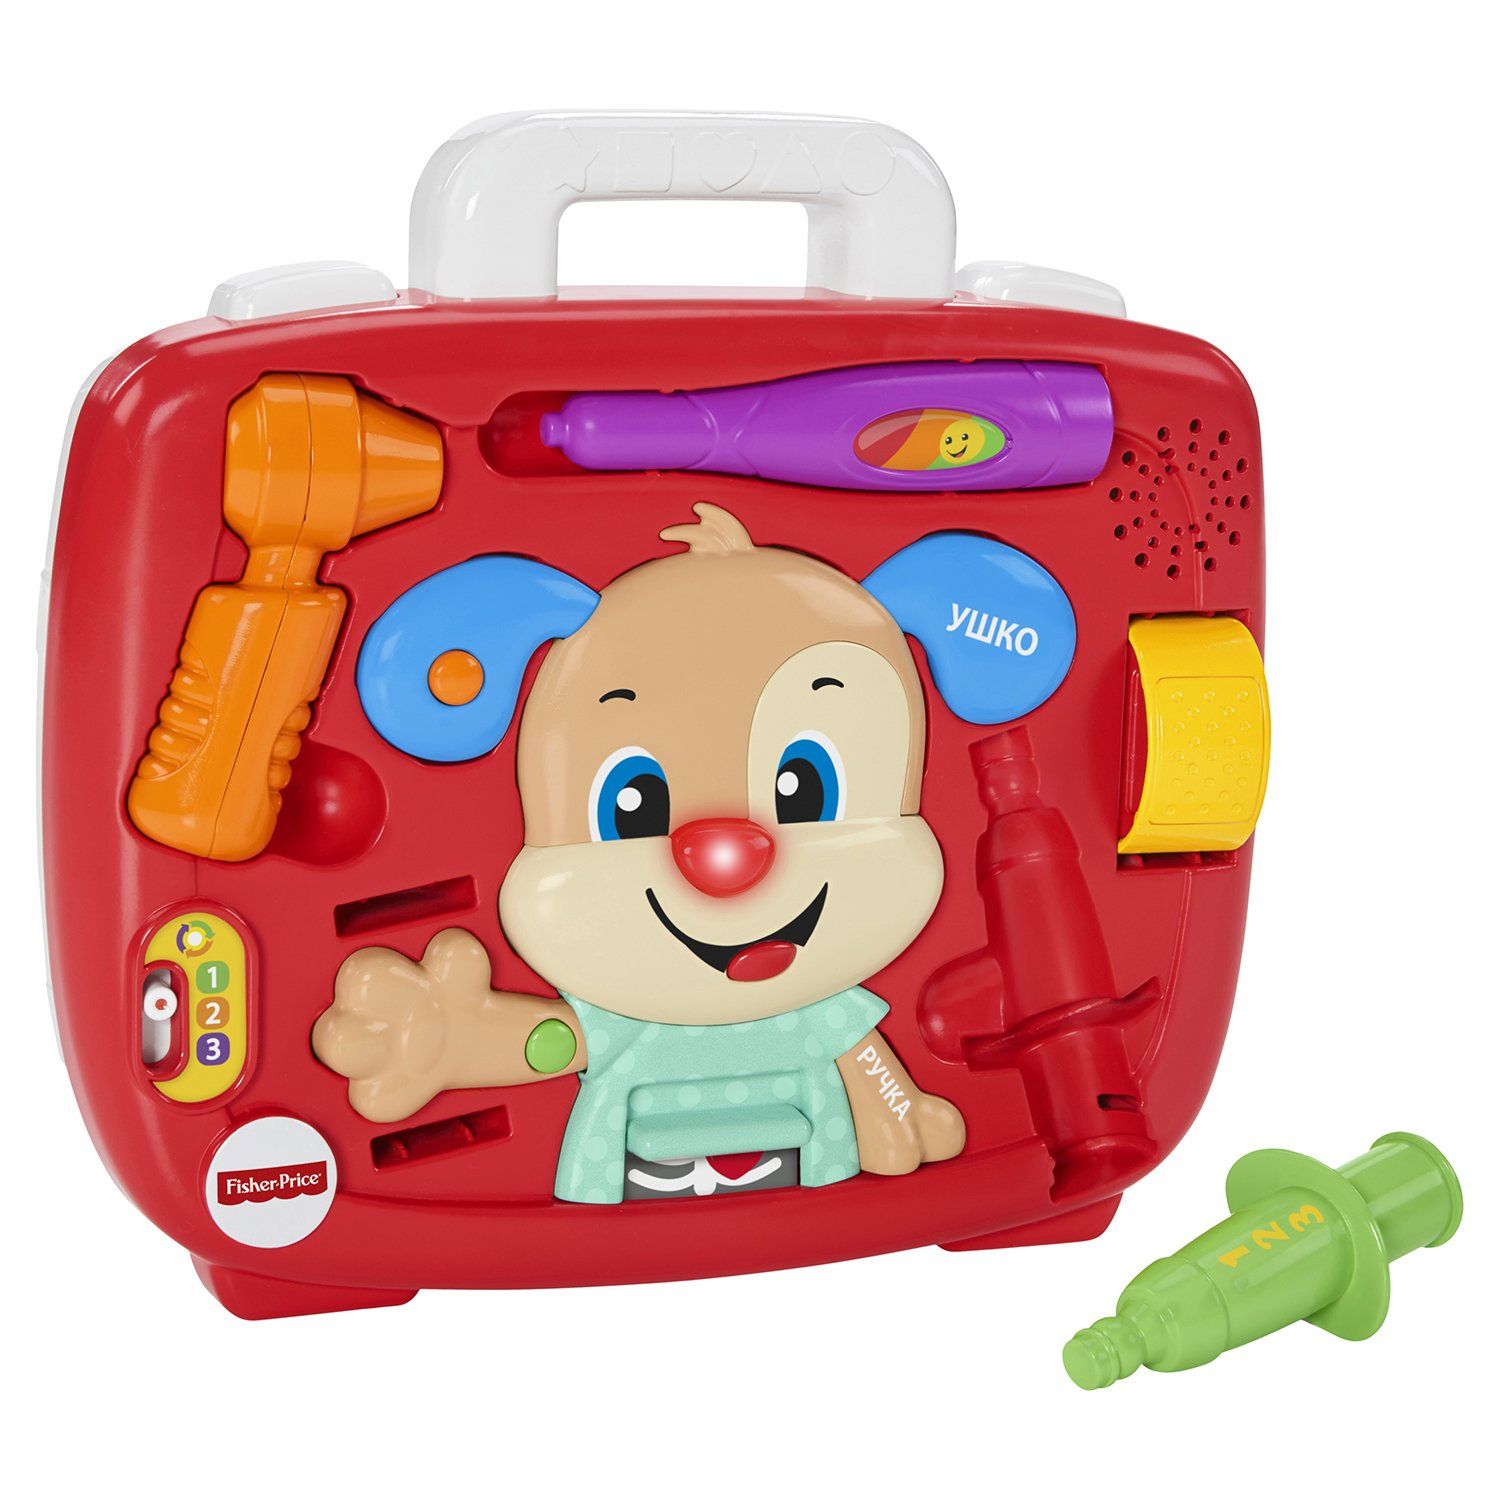   FISHER PRICE INFANT TOYS  FISHER-PRICE    , FTC79